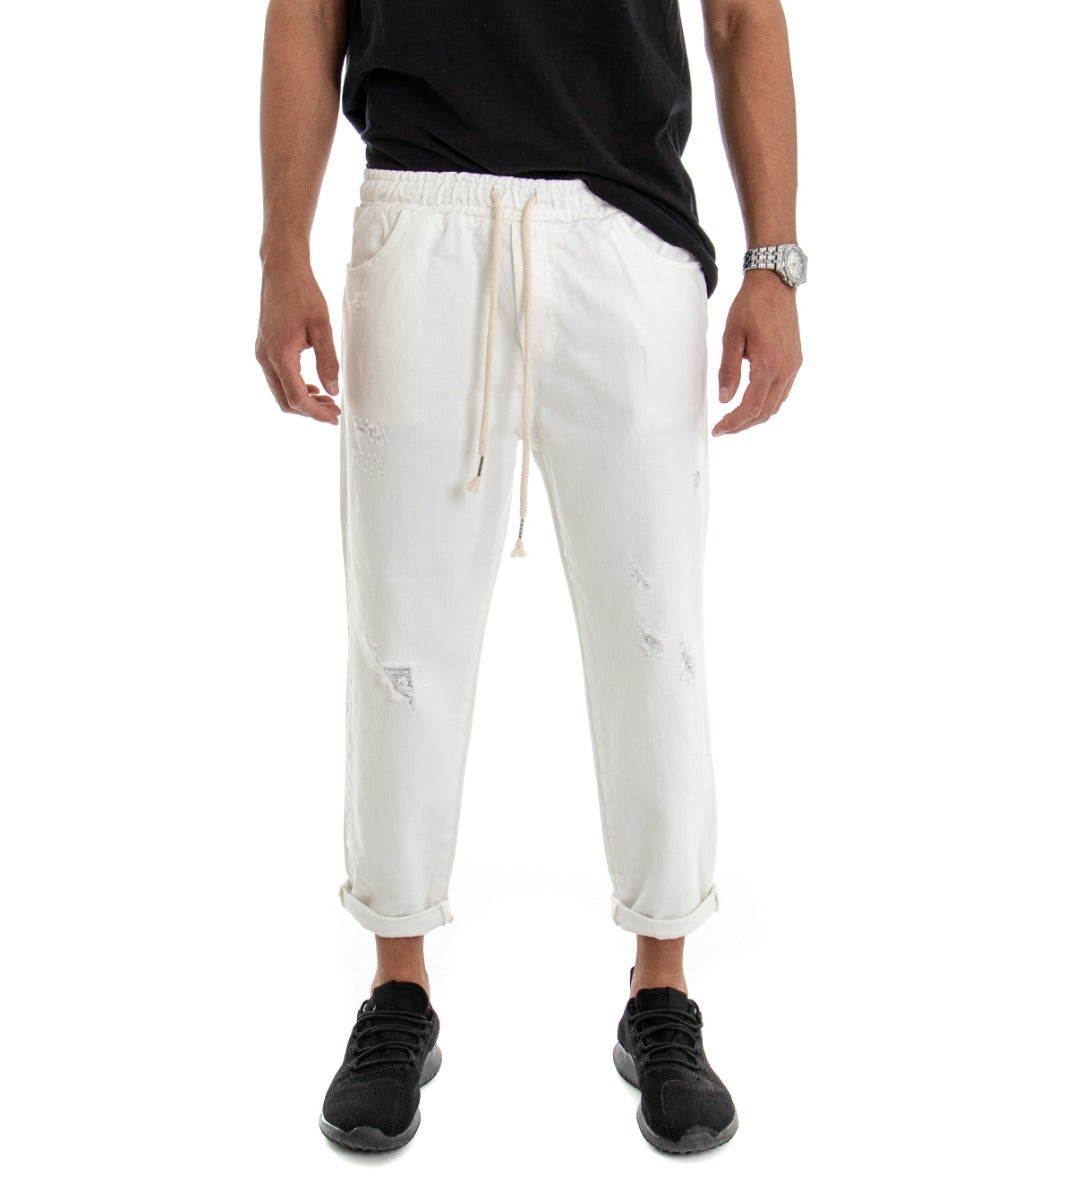 Men's Jeans Trousers Regular Fit White Bull Trousers With Casual Rips GIOSAL-P3037A